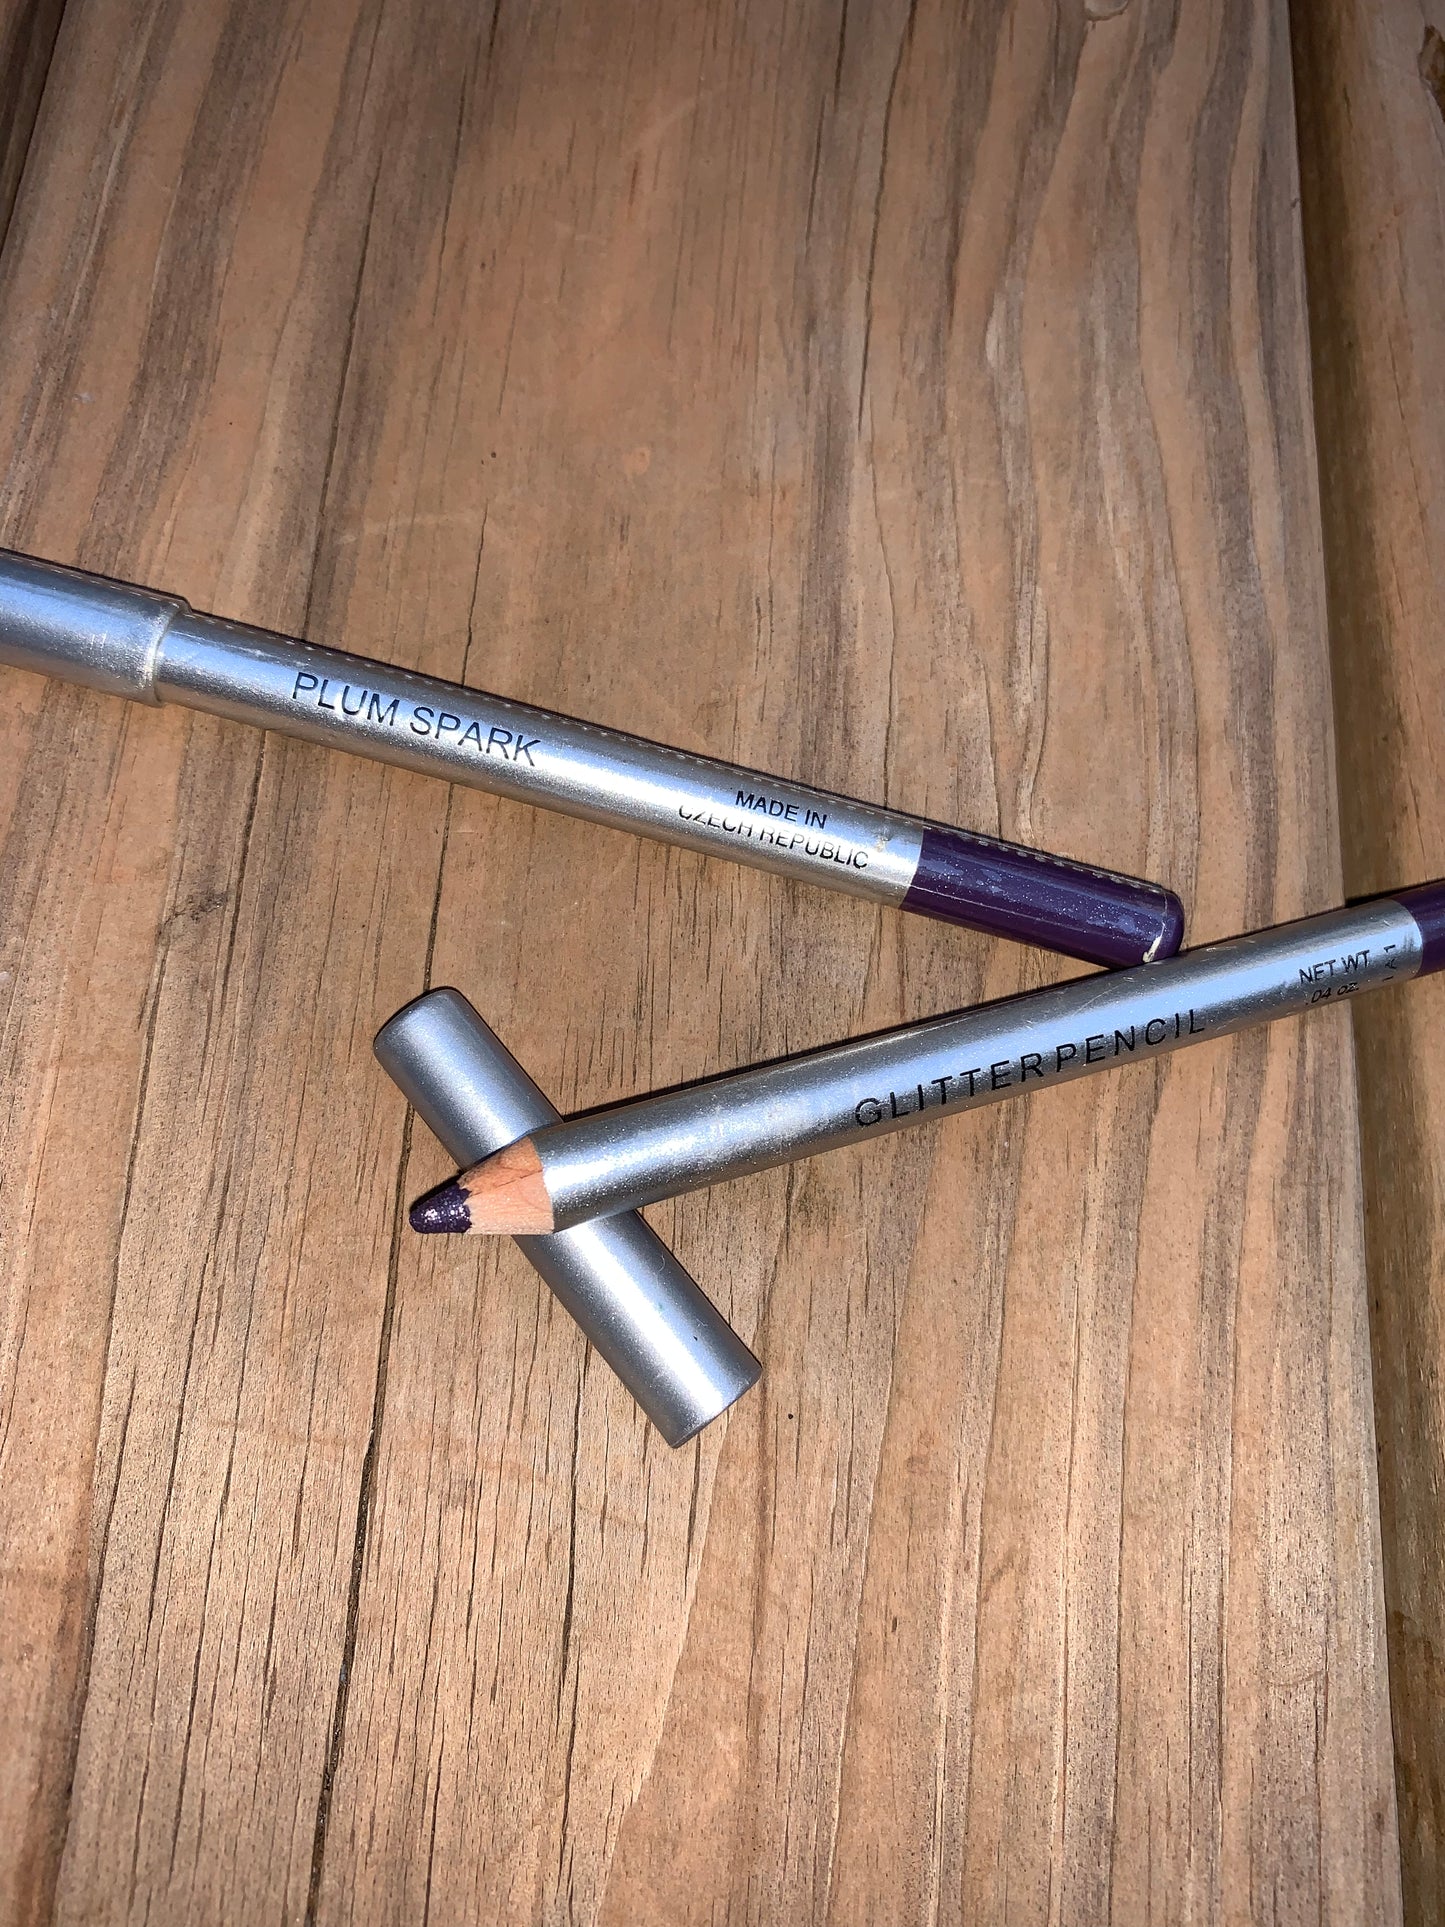 OSP Cosmetics Glitter Pencil Eye Liners, Swatched